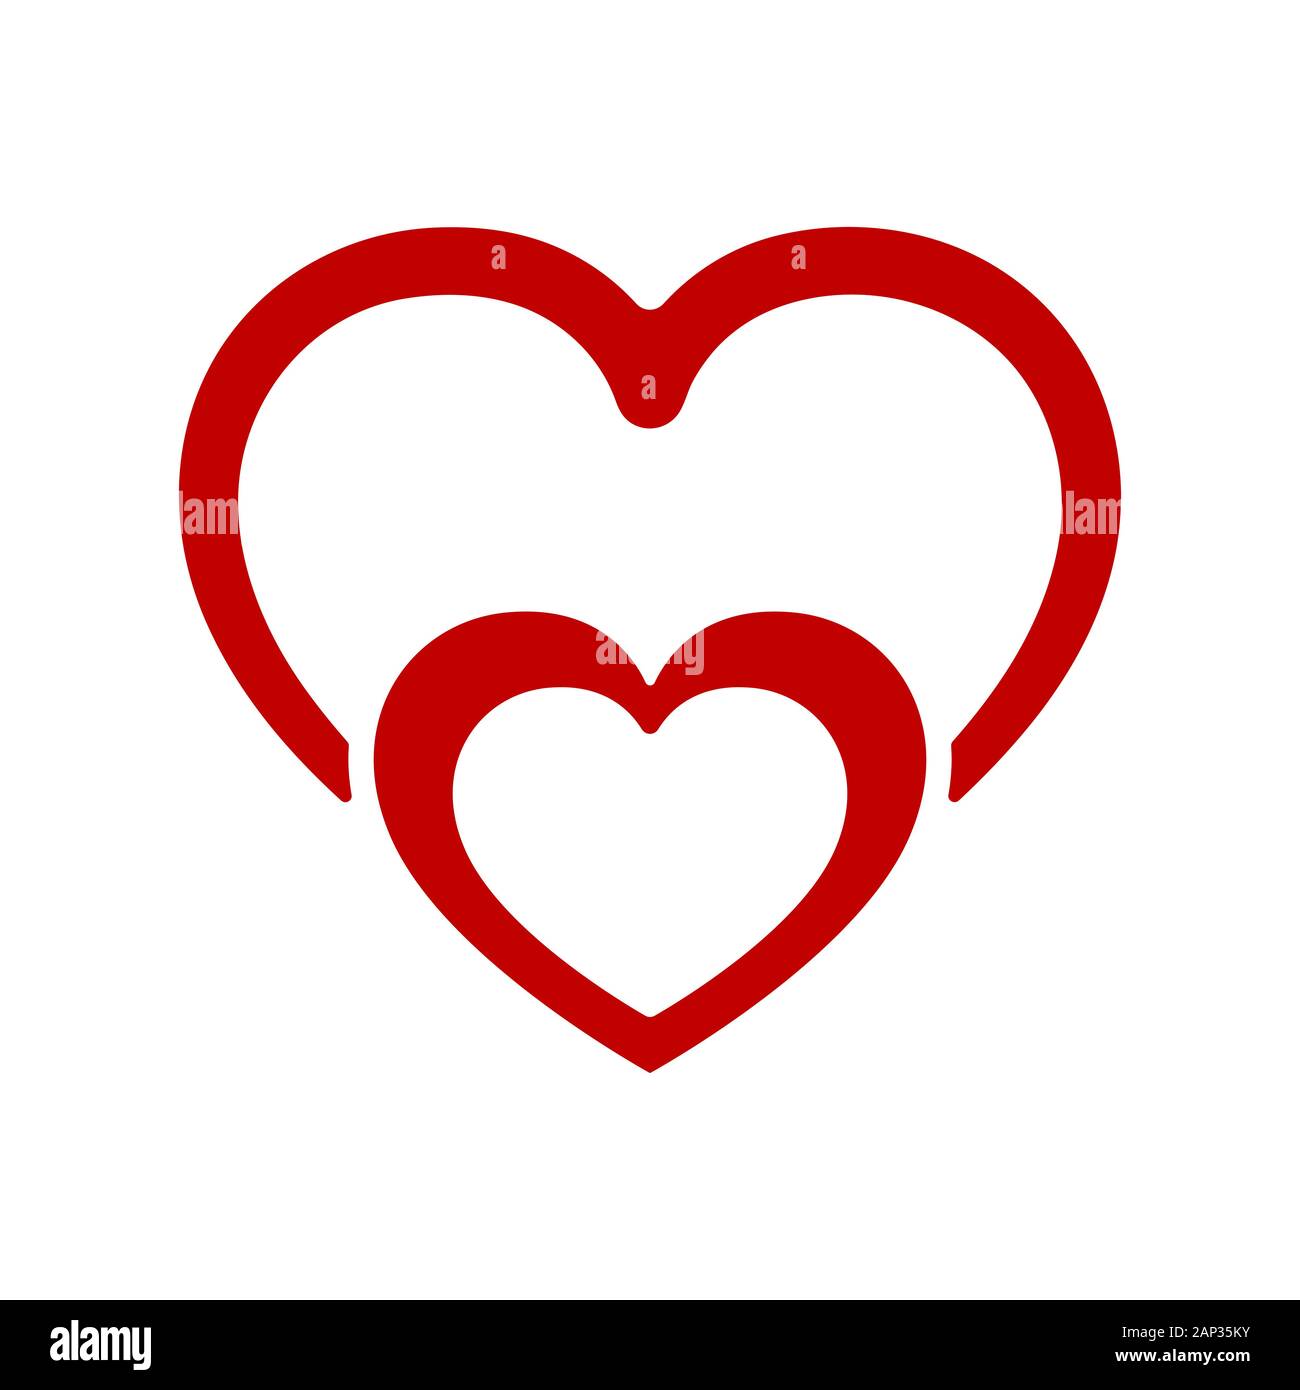 Heart Shape Symbol Vector Images (over 270,000)